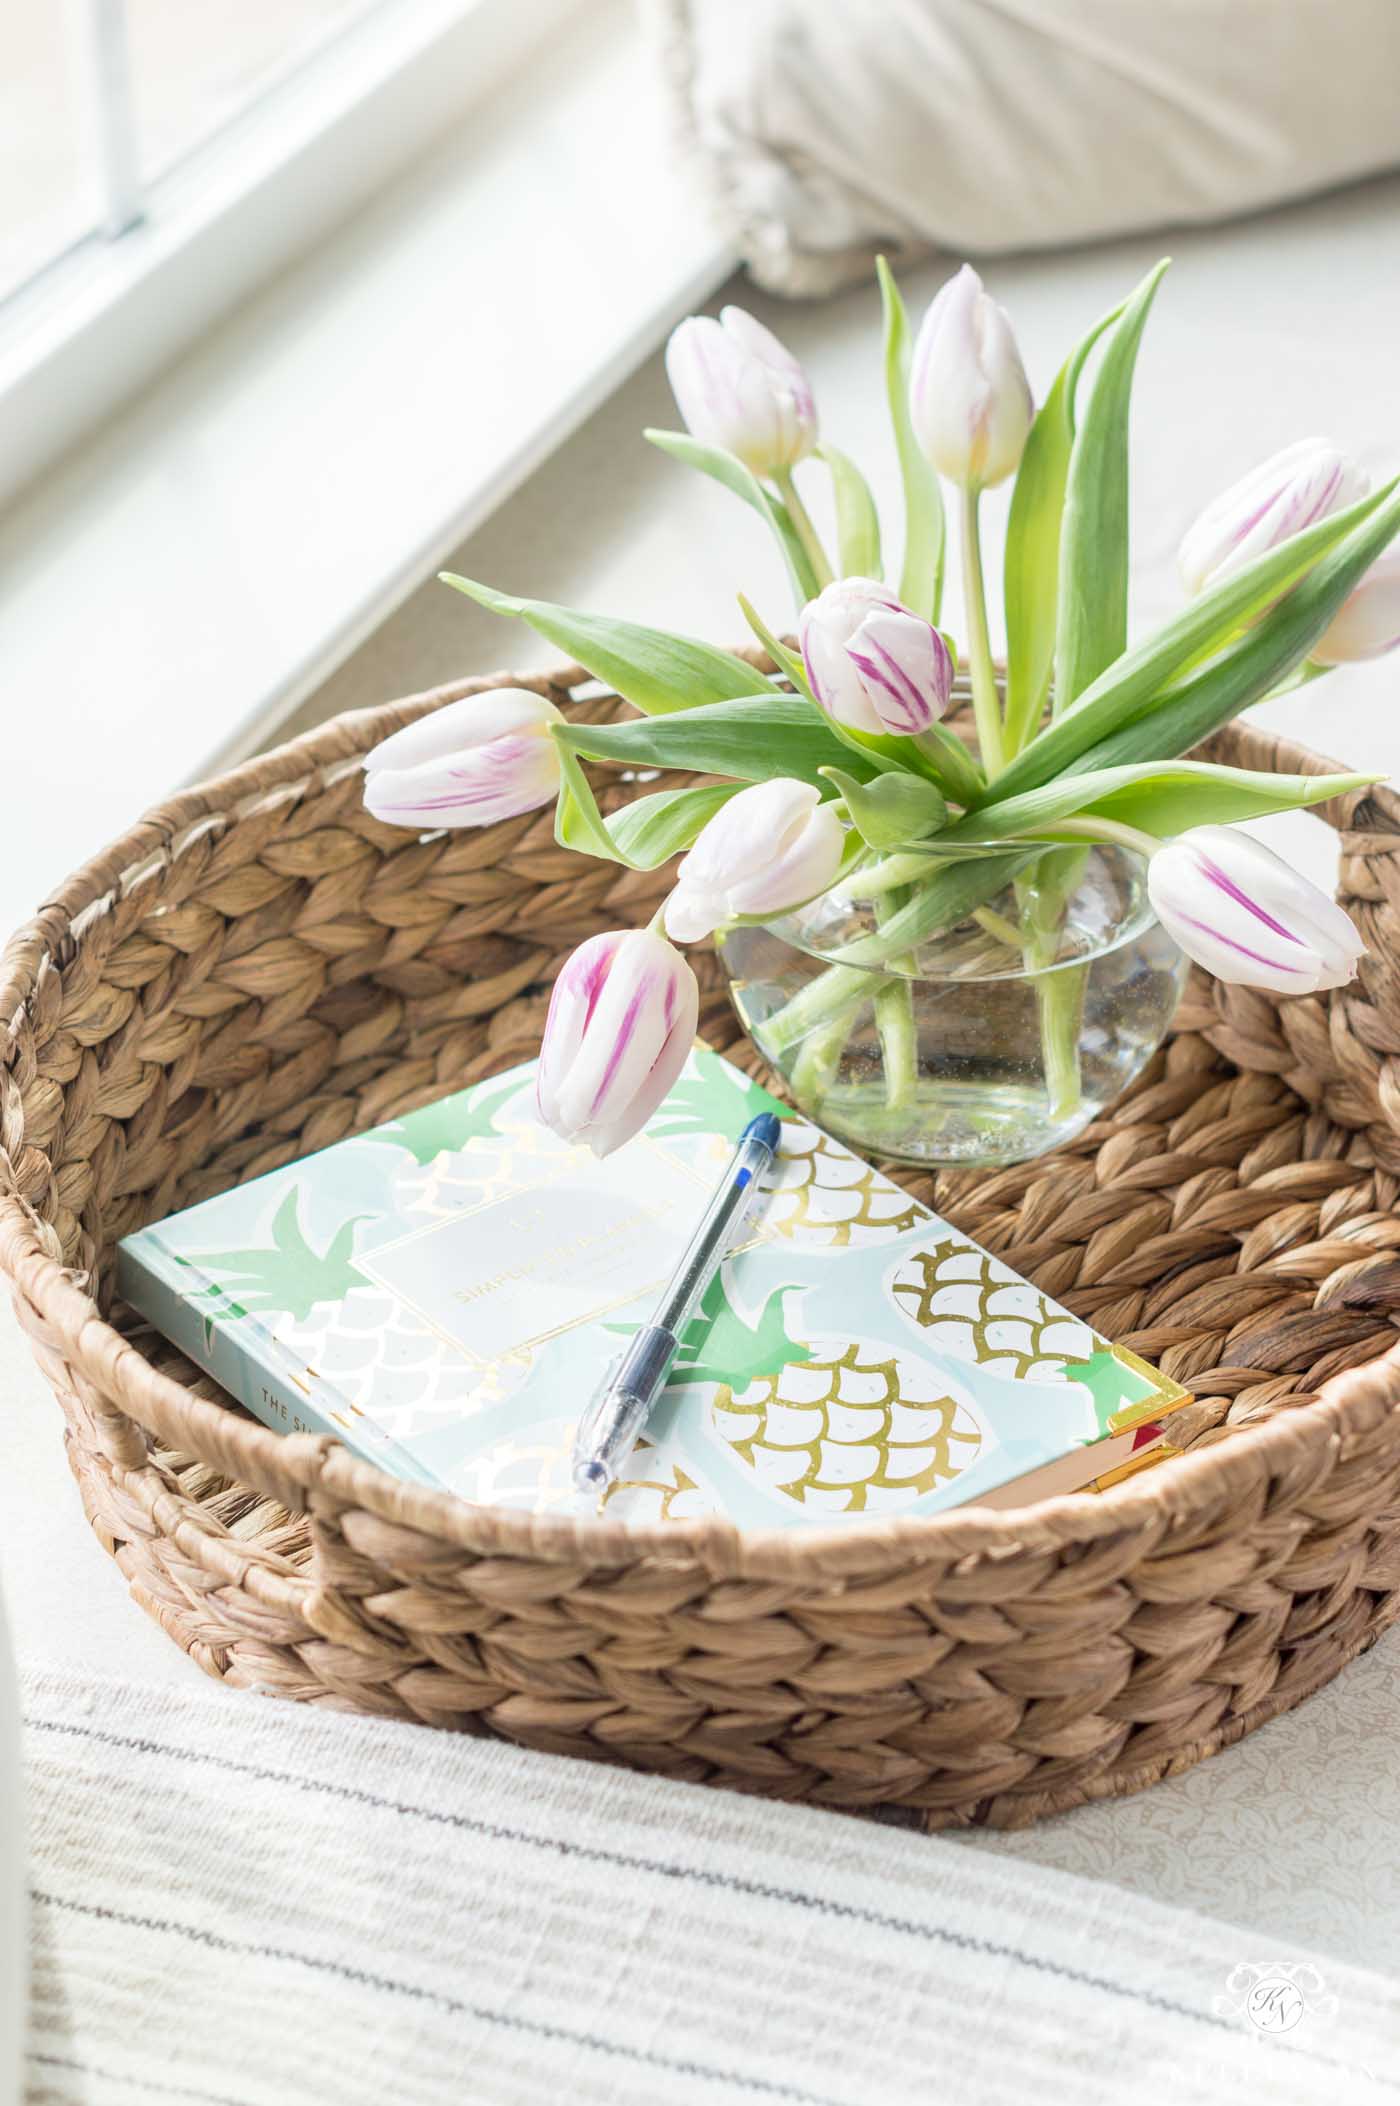 5 Ways to Bring Spring to Your Desk, Office, and Work Space - Kelley Nan